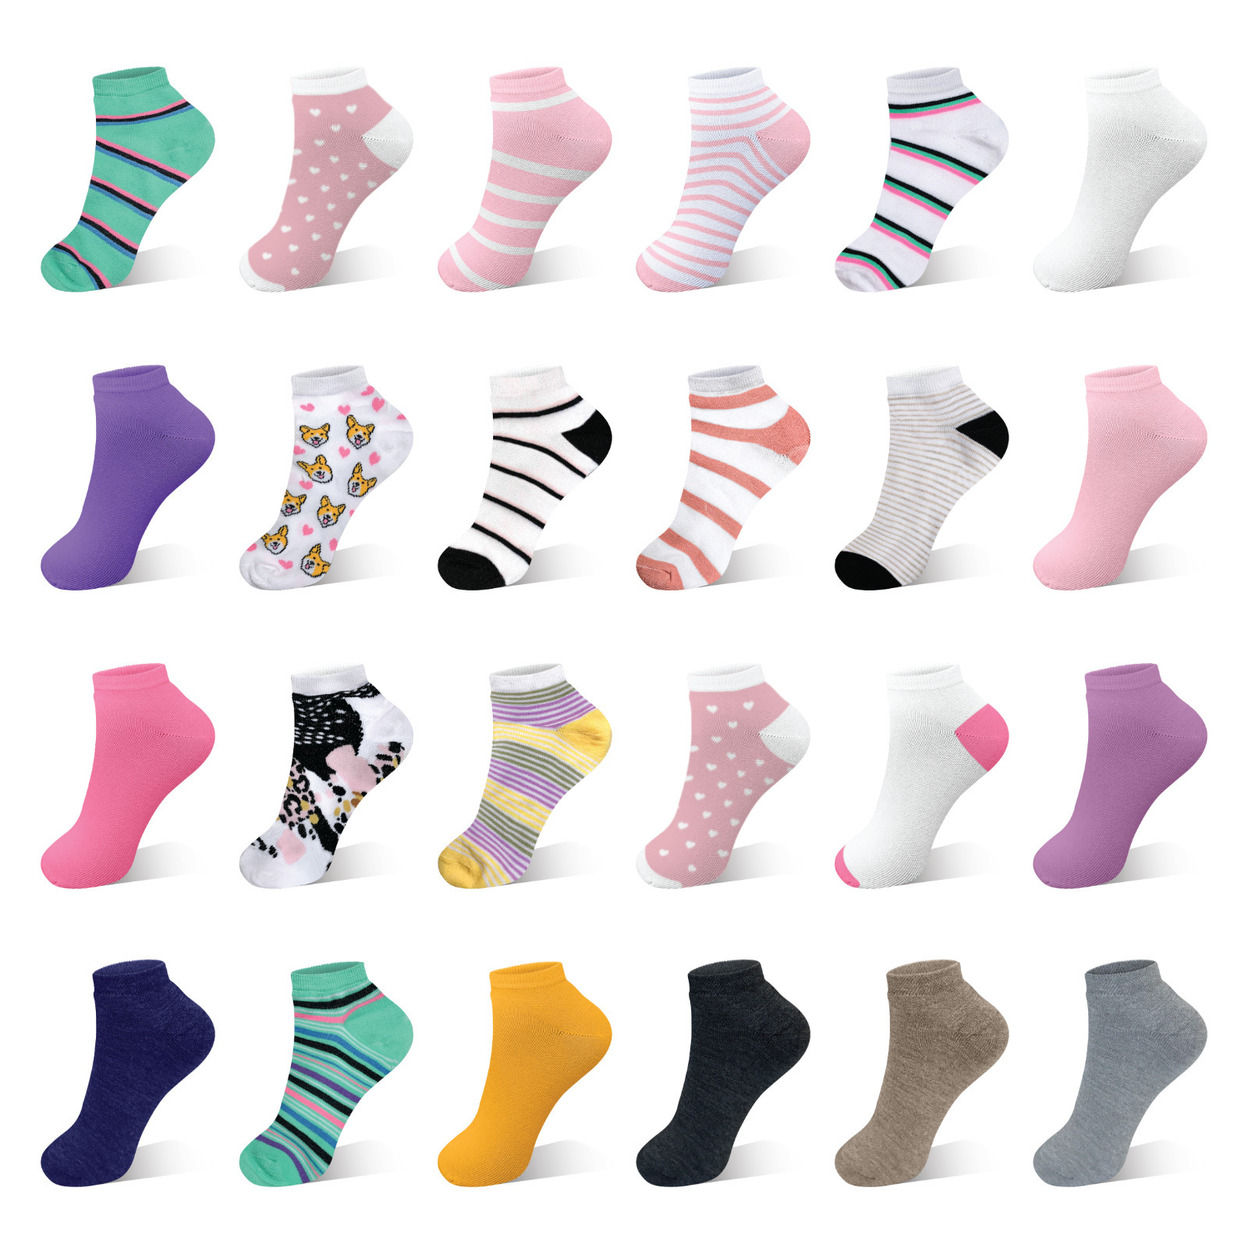 Multi-Pairs: Women’s Breathable Fun-Funky Colorful No Show Low Cut Ankle Socks - 10-pairs